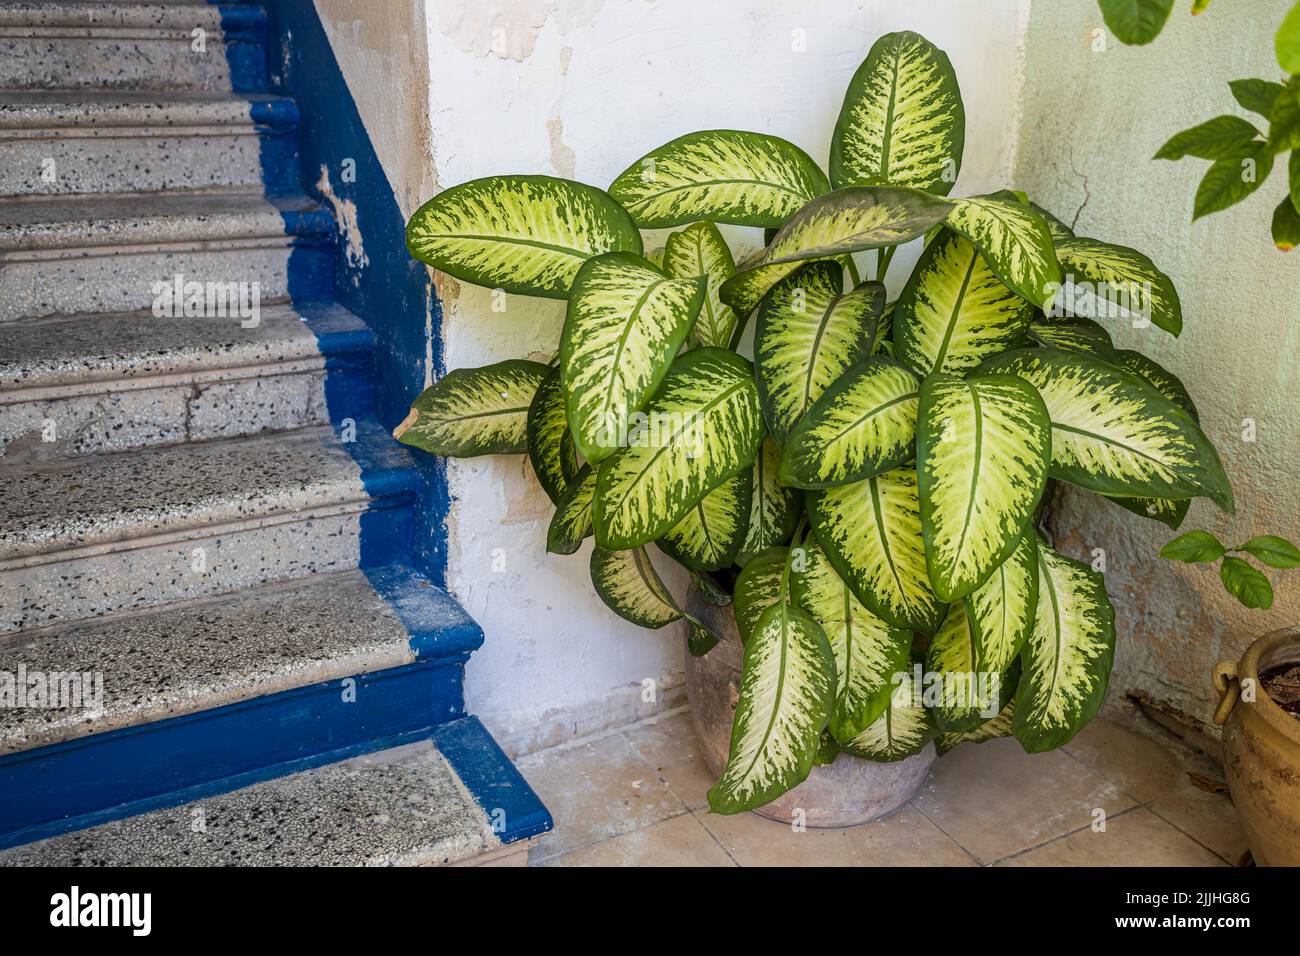 Dieffenbachia plant in a tub near the stairs as an entrance decoration Stock Photo